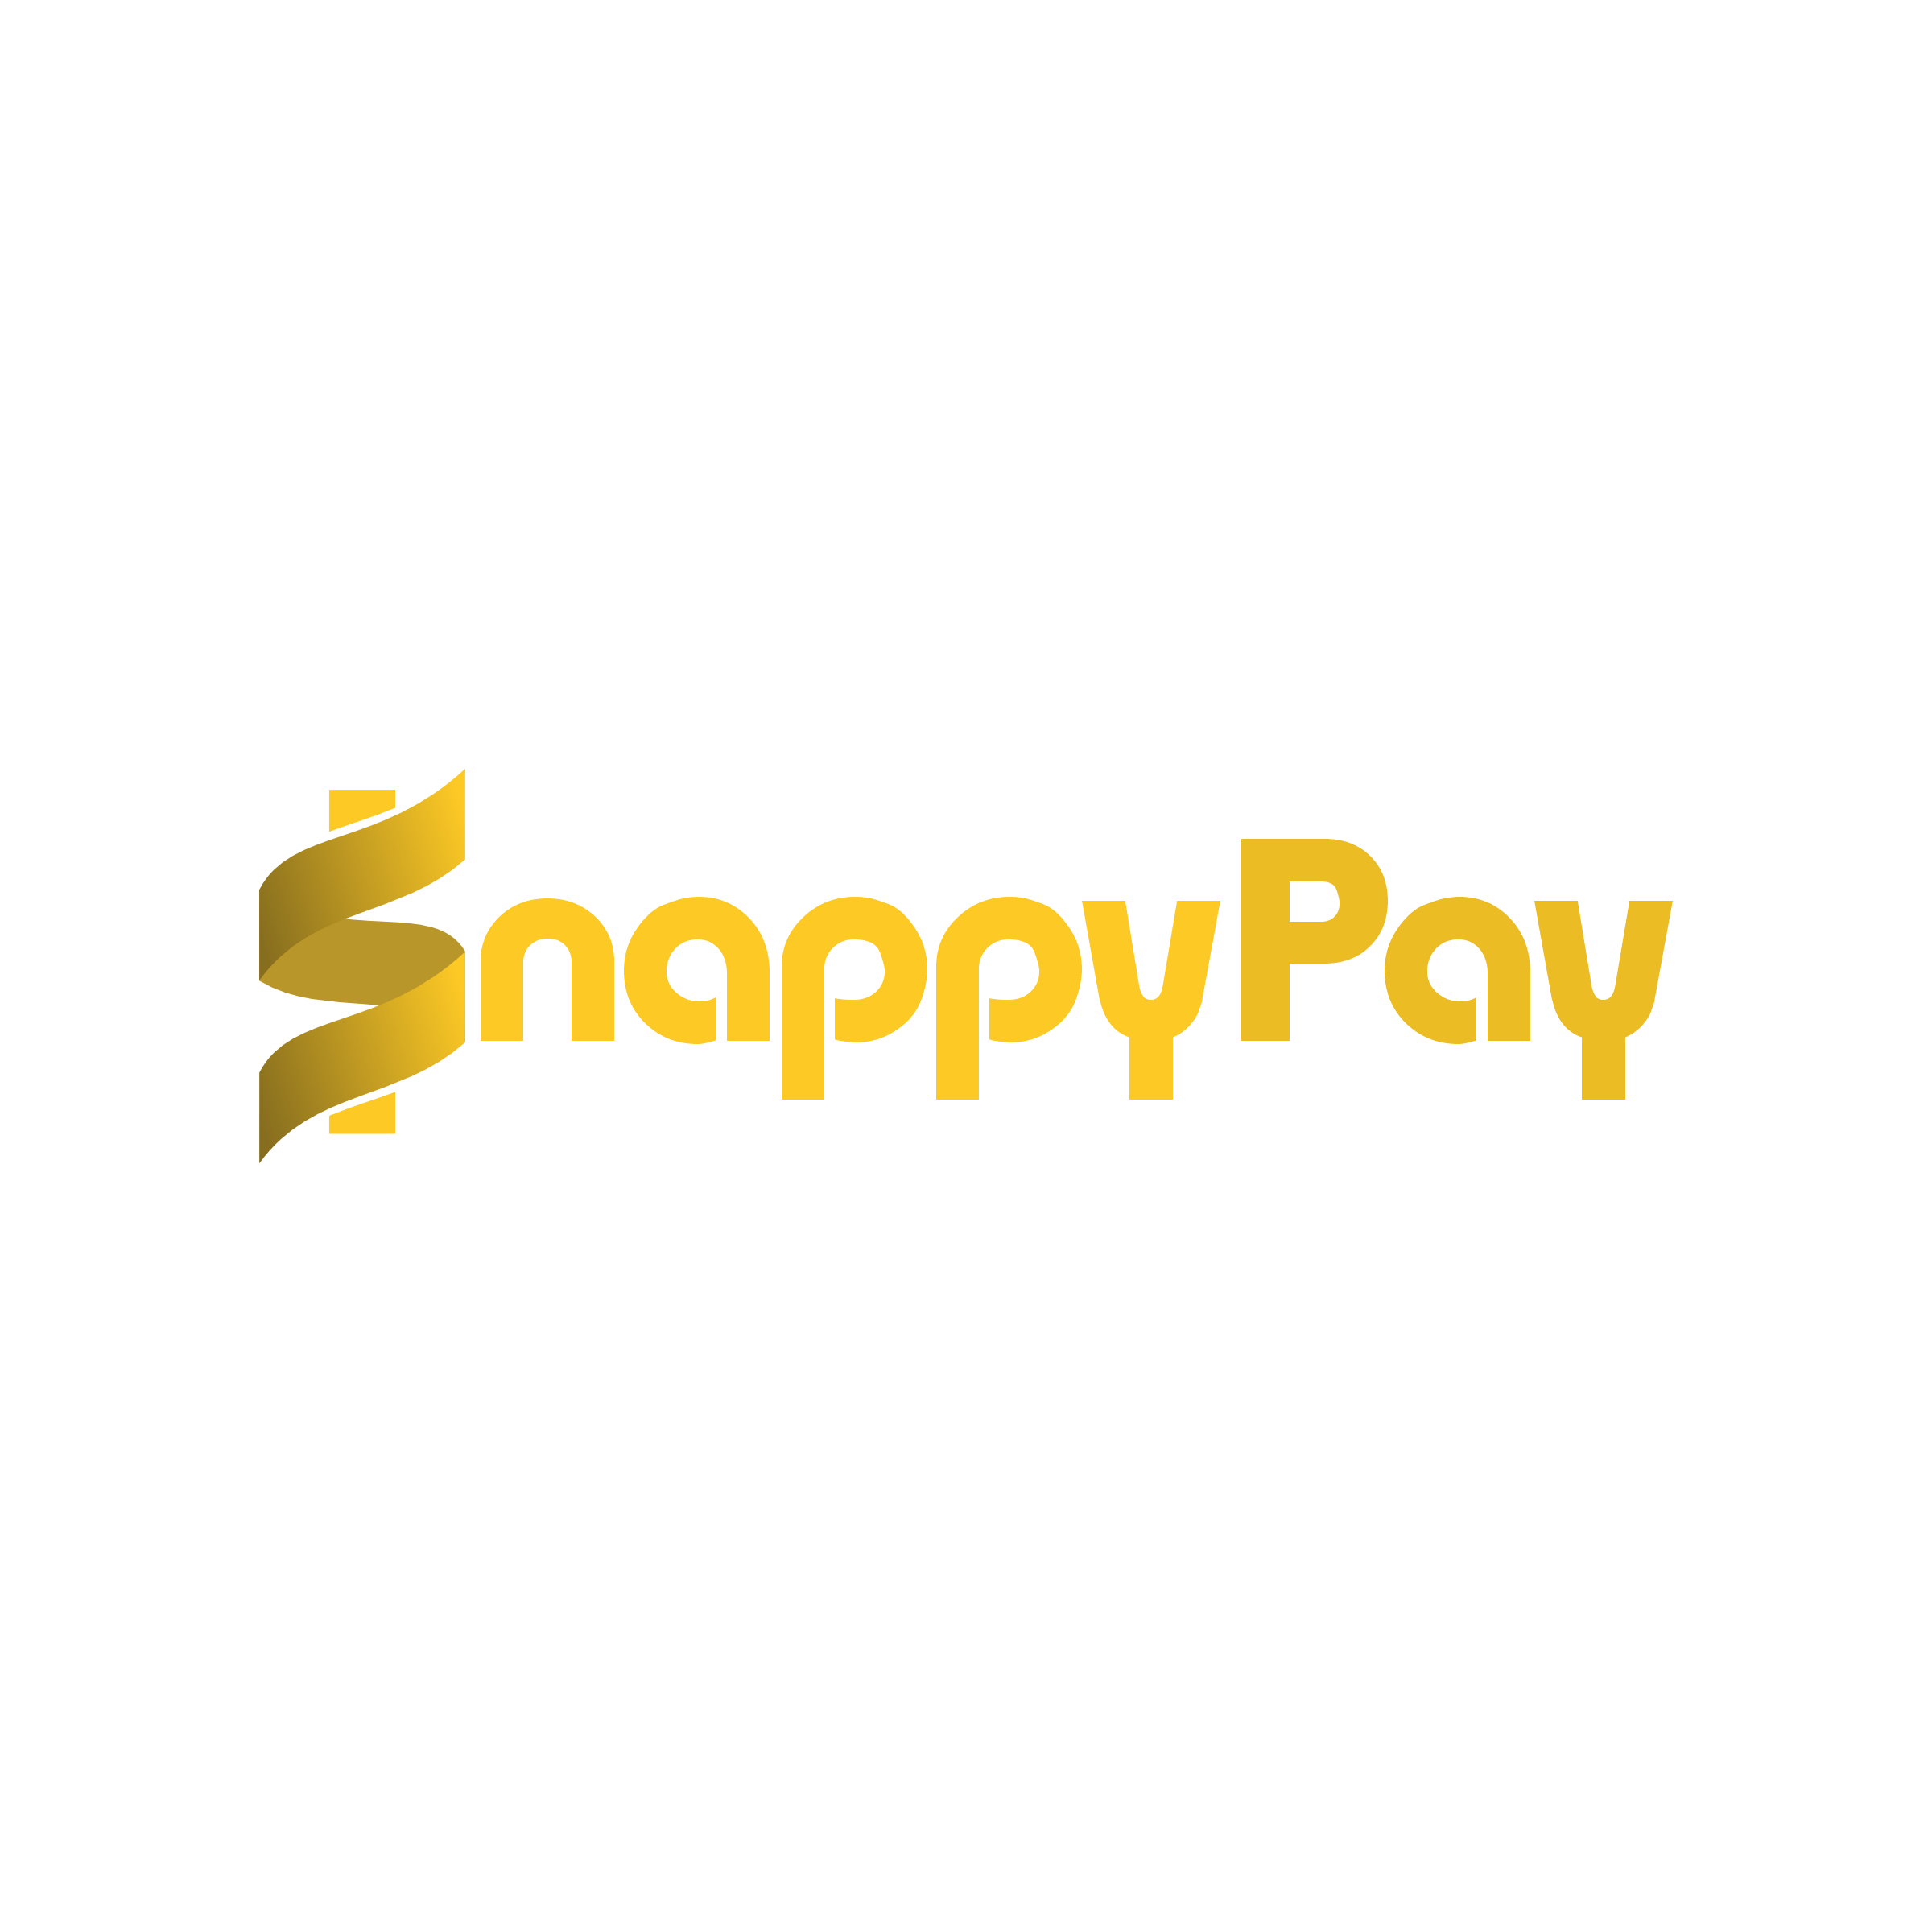 Pay snappysolutions on UfitPay.com